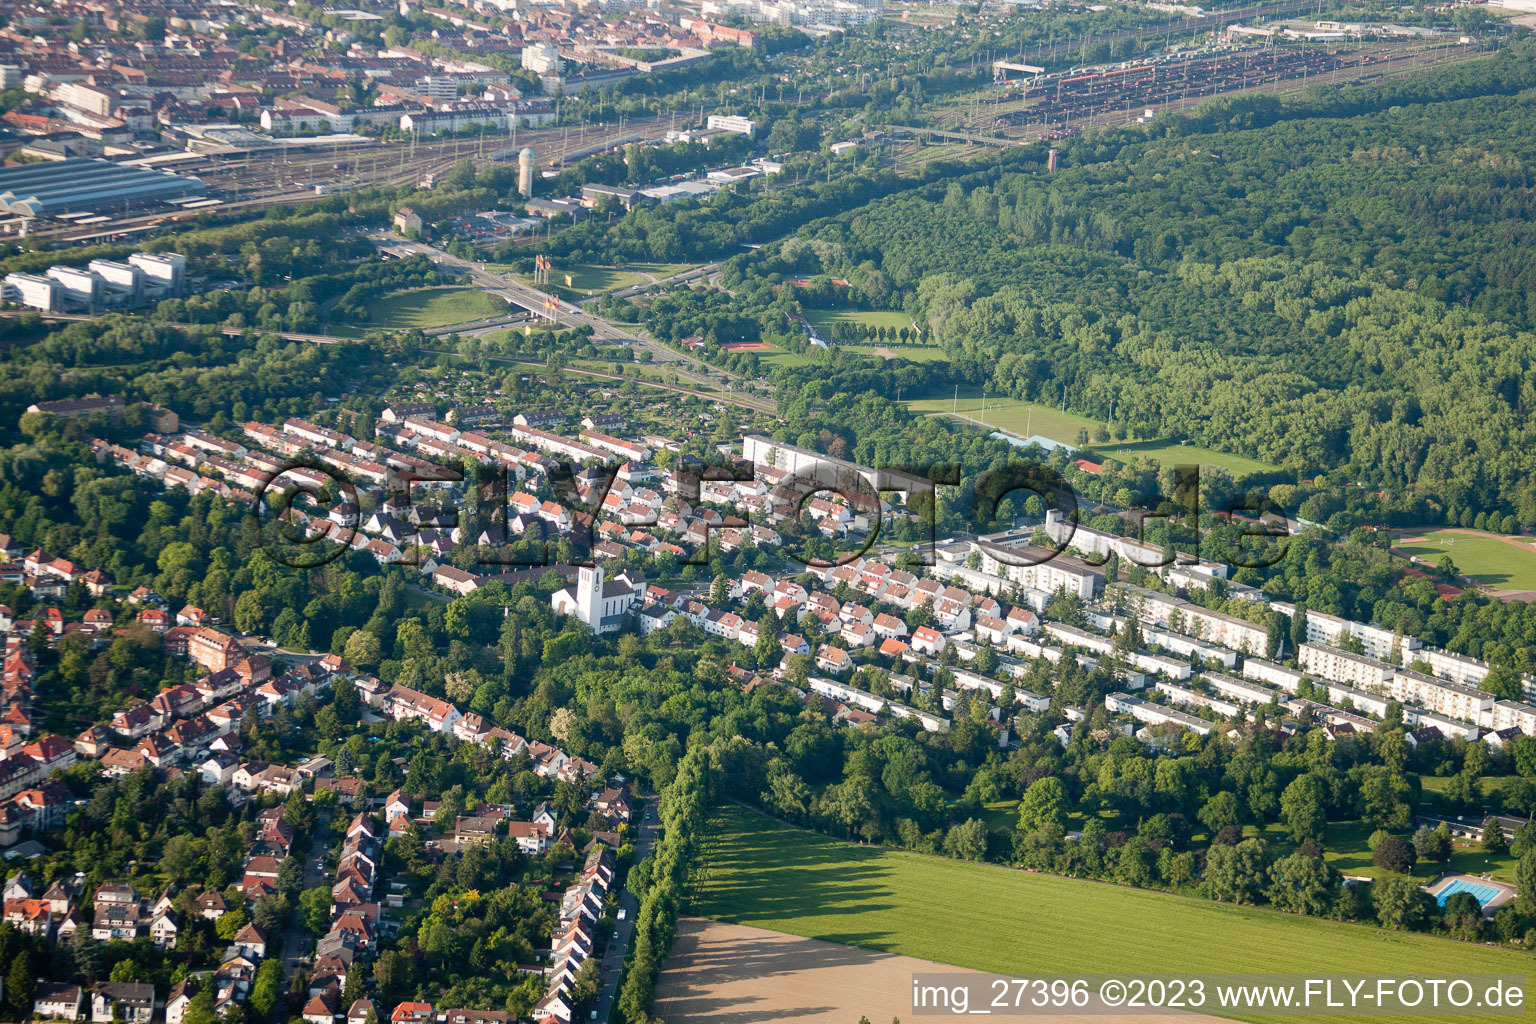 District Weiherfeld-Dammerstock in Karlsruhe in the state Baden-Wuerttemberg, Germany from above